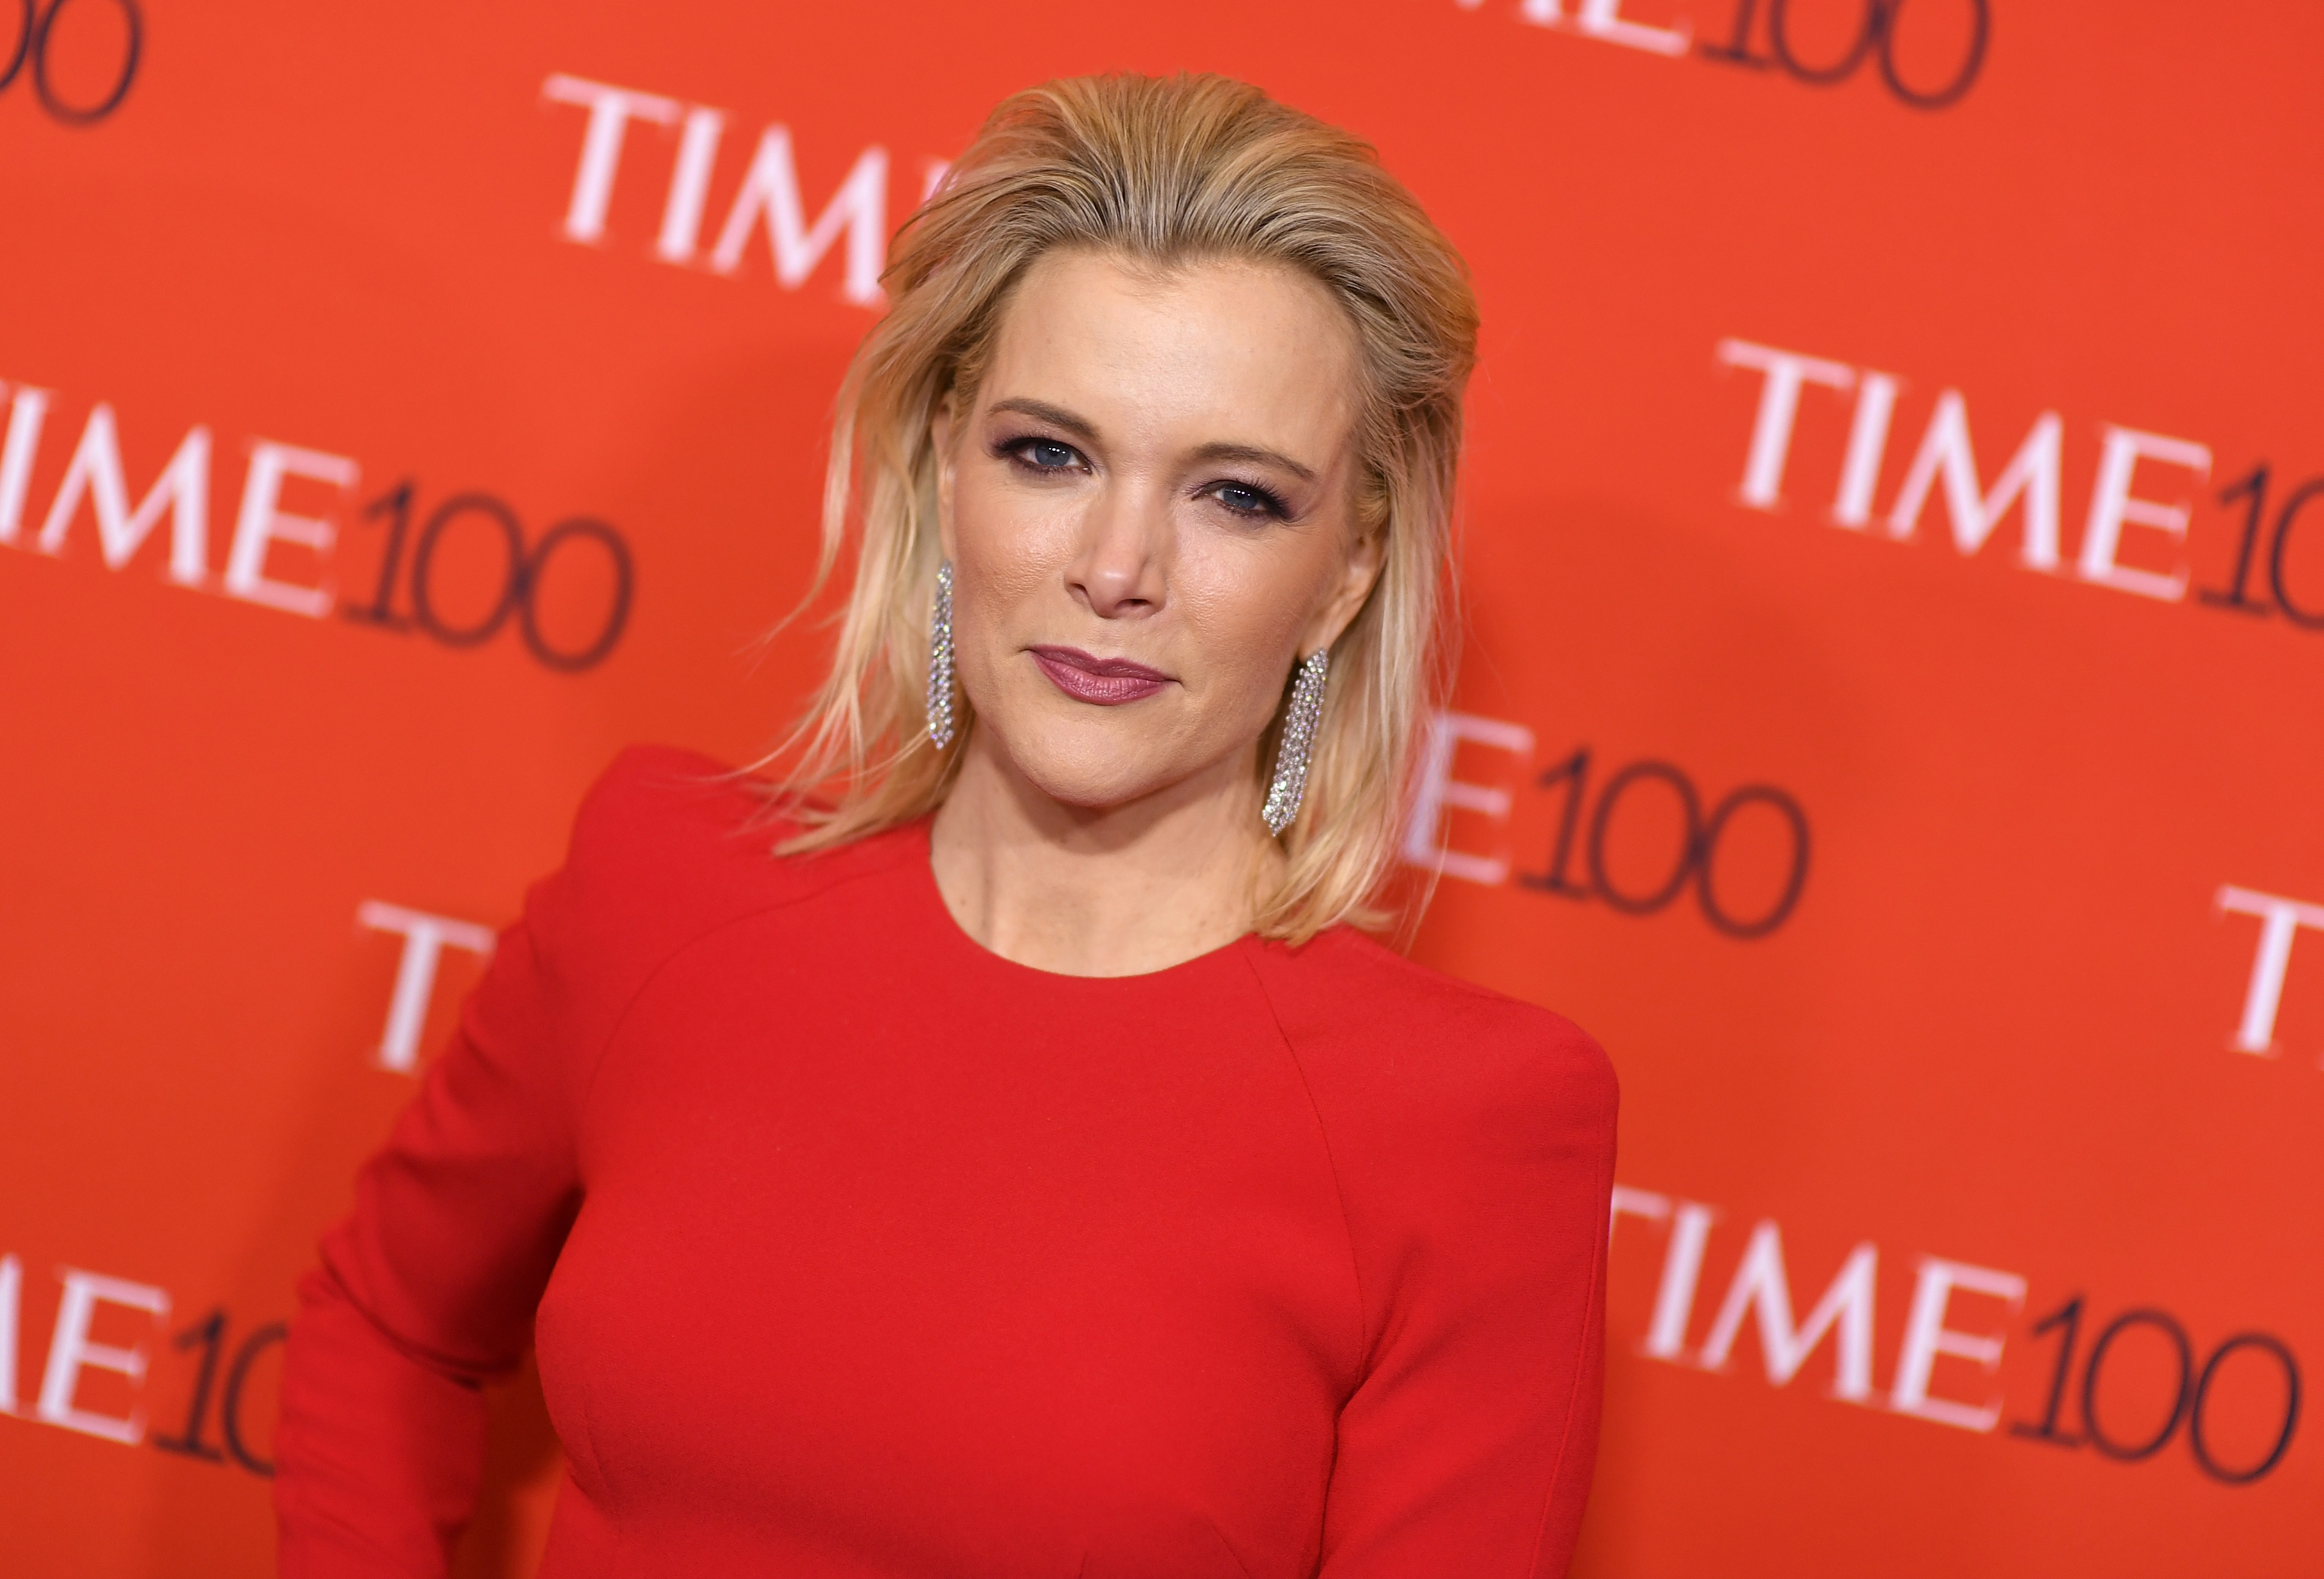 Megyn Kelly Says She Wishes She Had “Done More” to Stop Sexual Harassment at Fox News